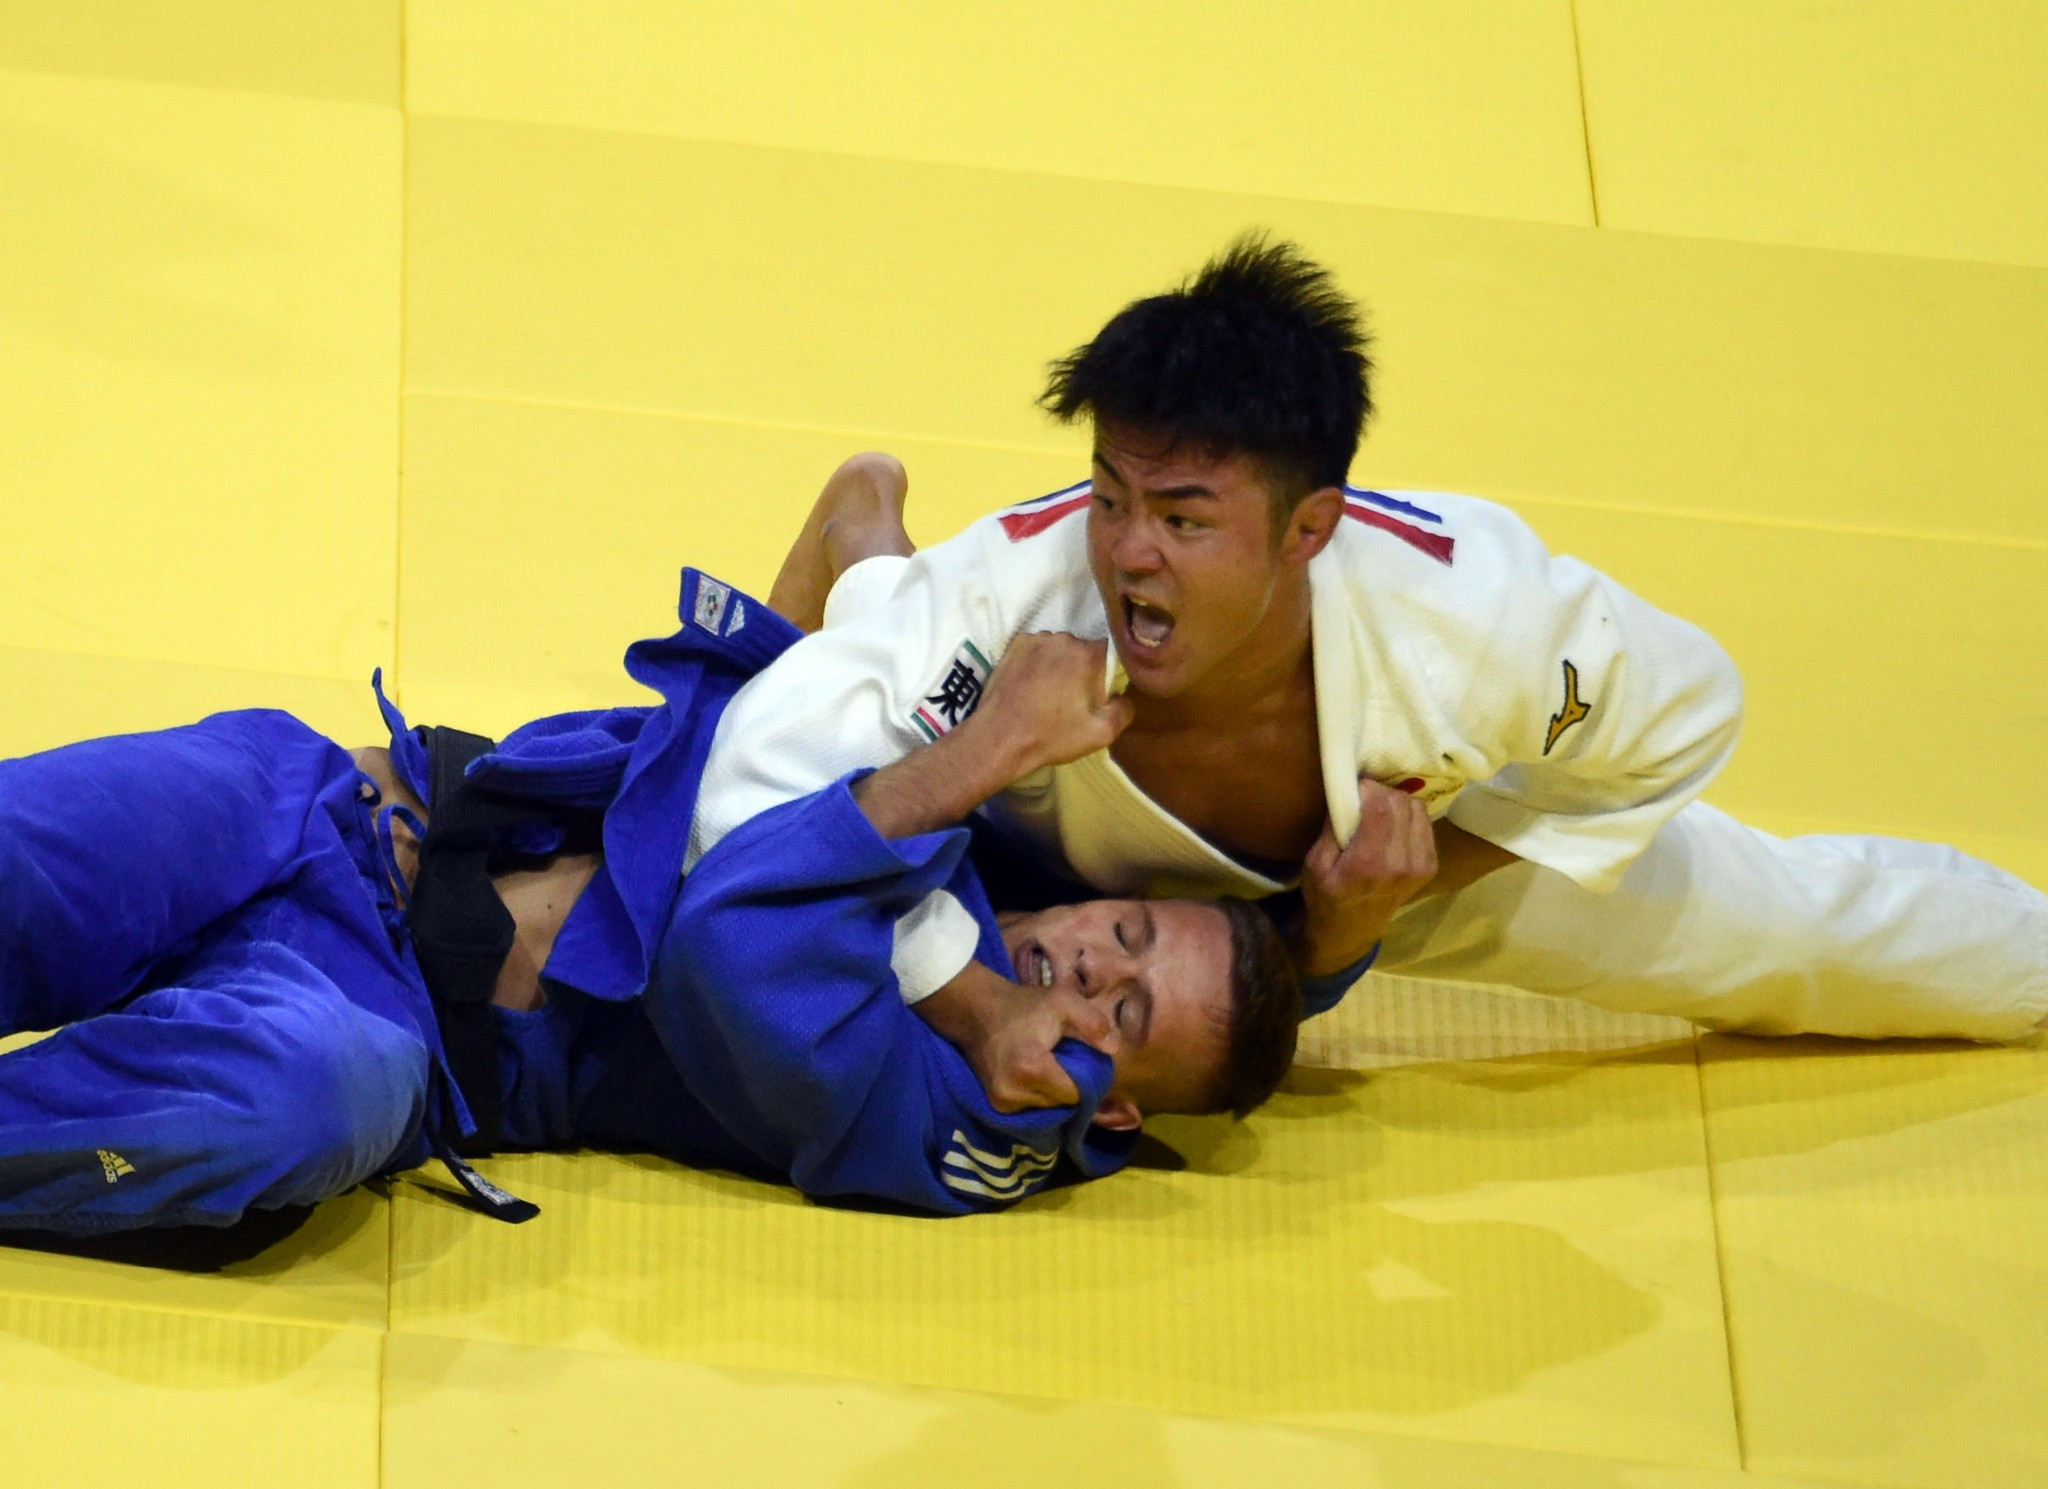 Eleven Sports hope the deal will help them tap into the market of judo fans ©Getty Images